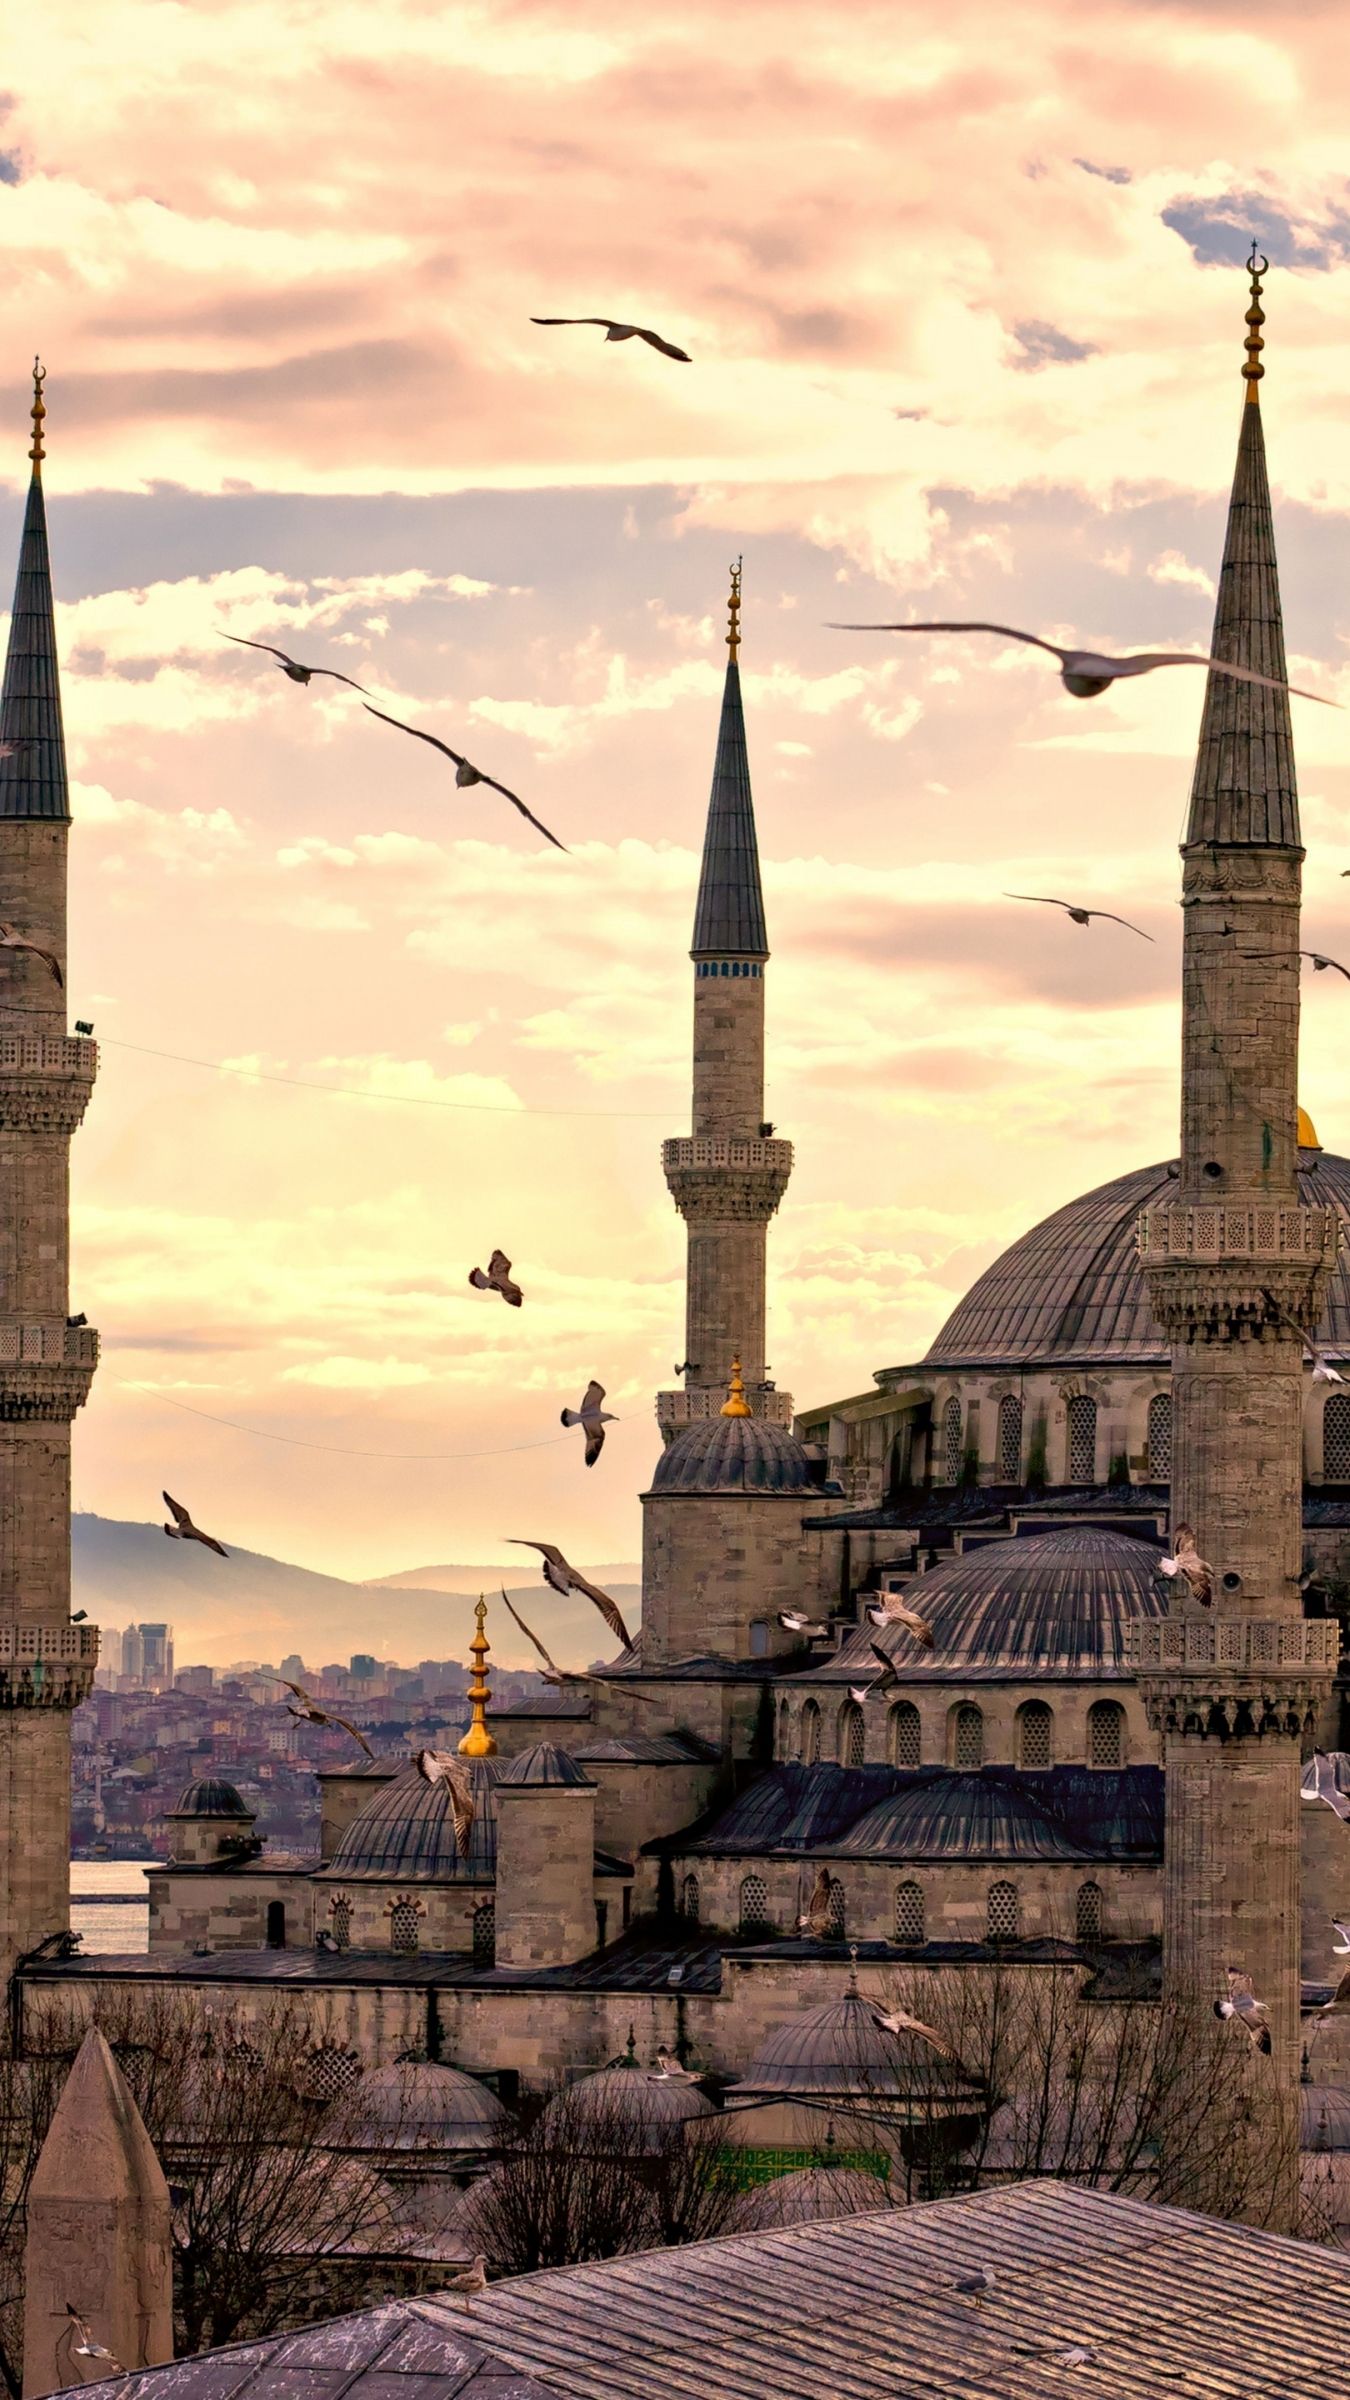 Download Sultan Ahmed Mosque, Istanbul, Turkey, Travel, Tourism Apple iPhone Plus wallpaper 1350x2400